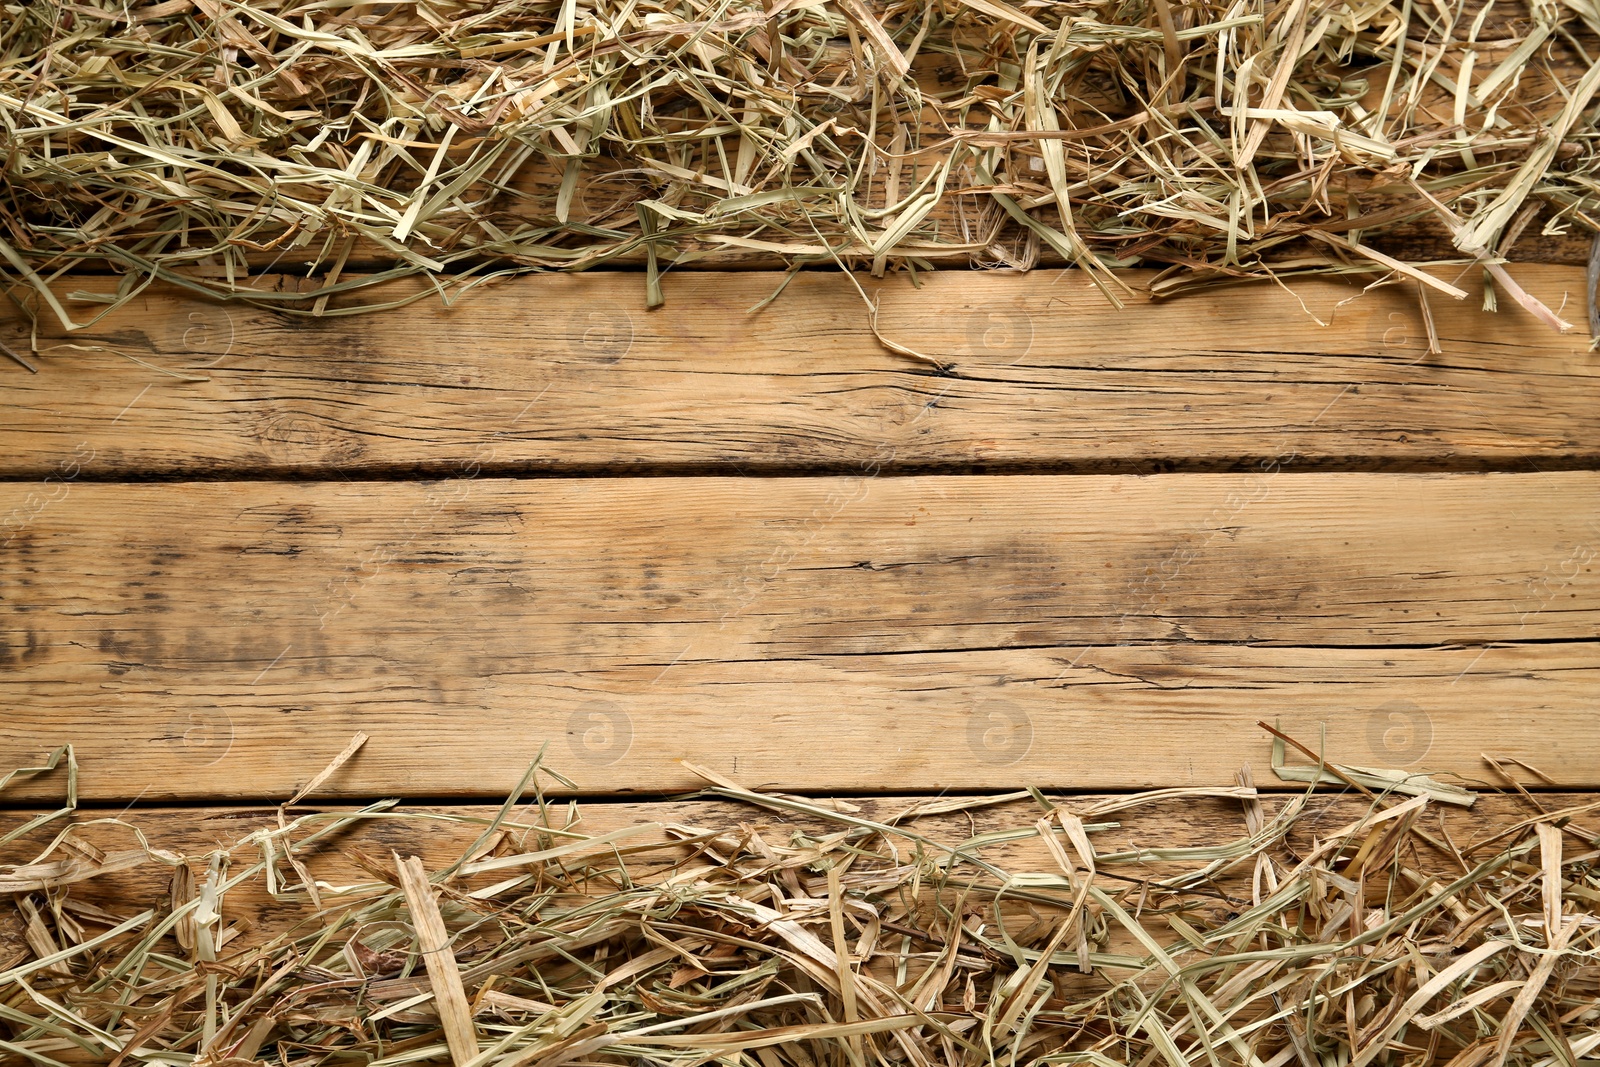 Photo of Dried hay on wooden background, flat lay. Space for text